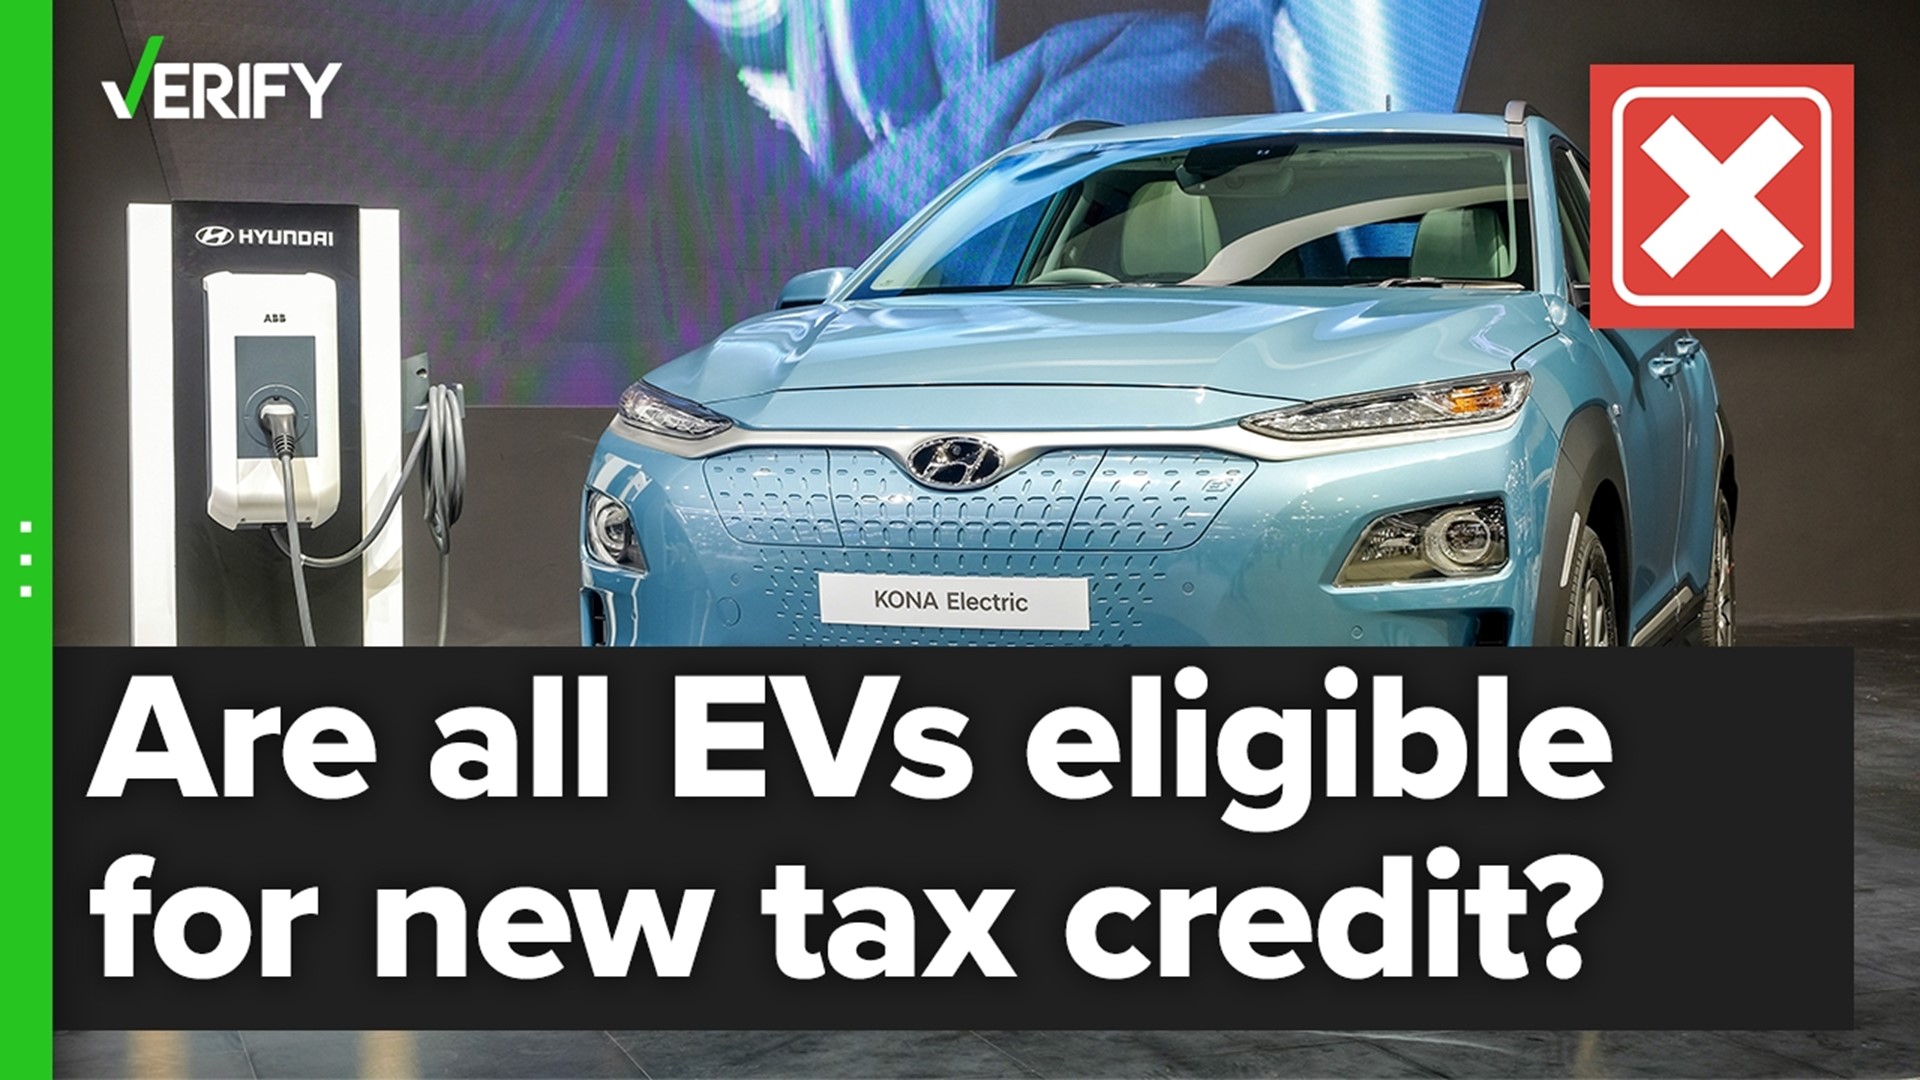 The Inflation Reduction Act includes tax credits for electric vehicles, but there are restrictions based on the price of the car and where it’s made.